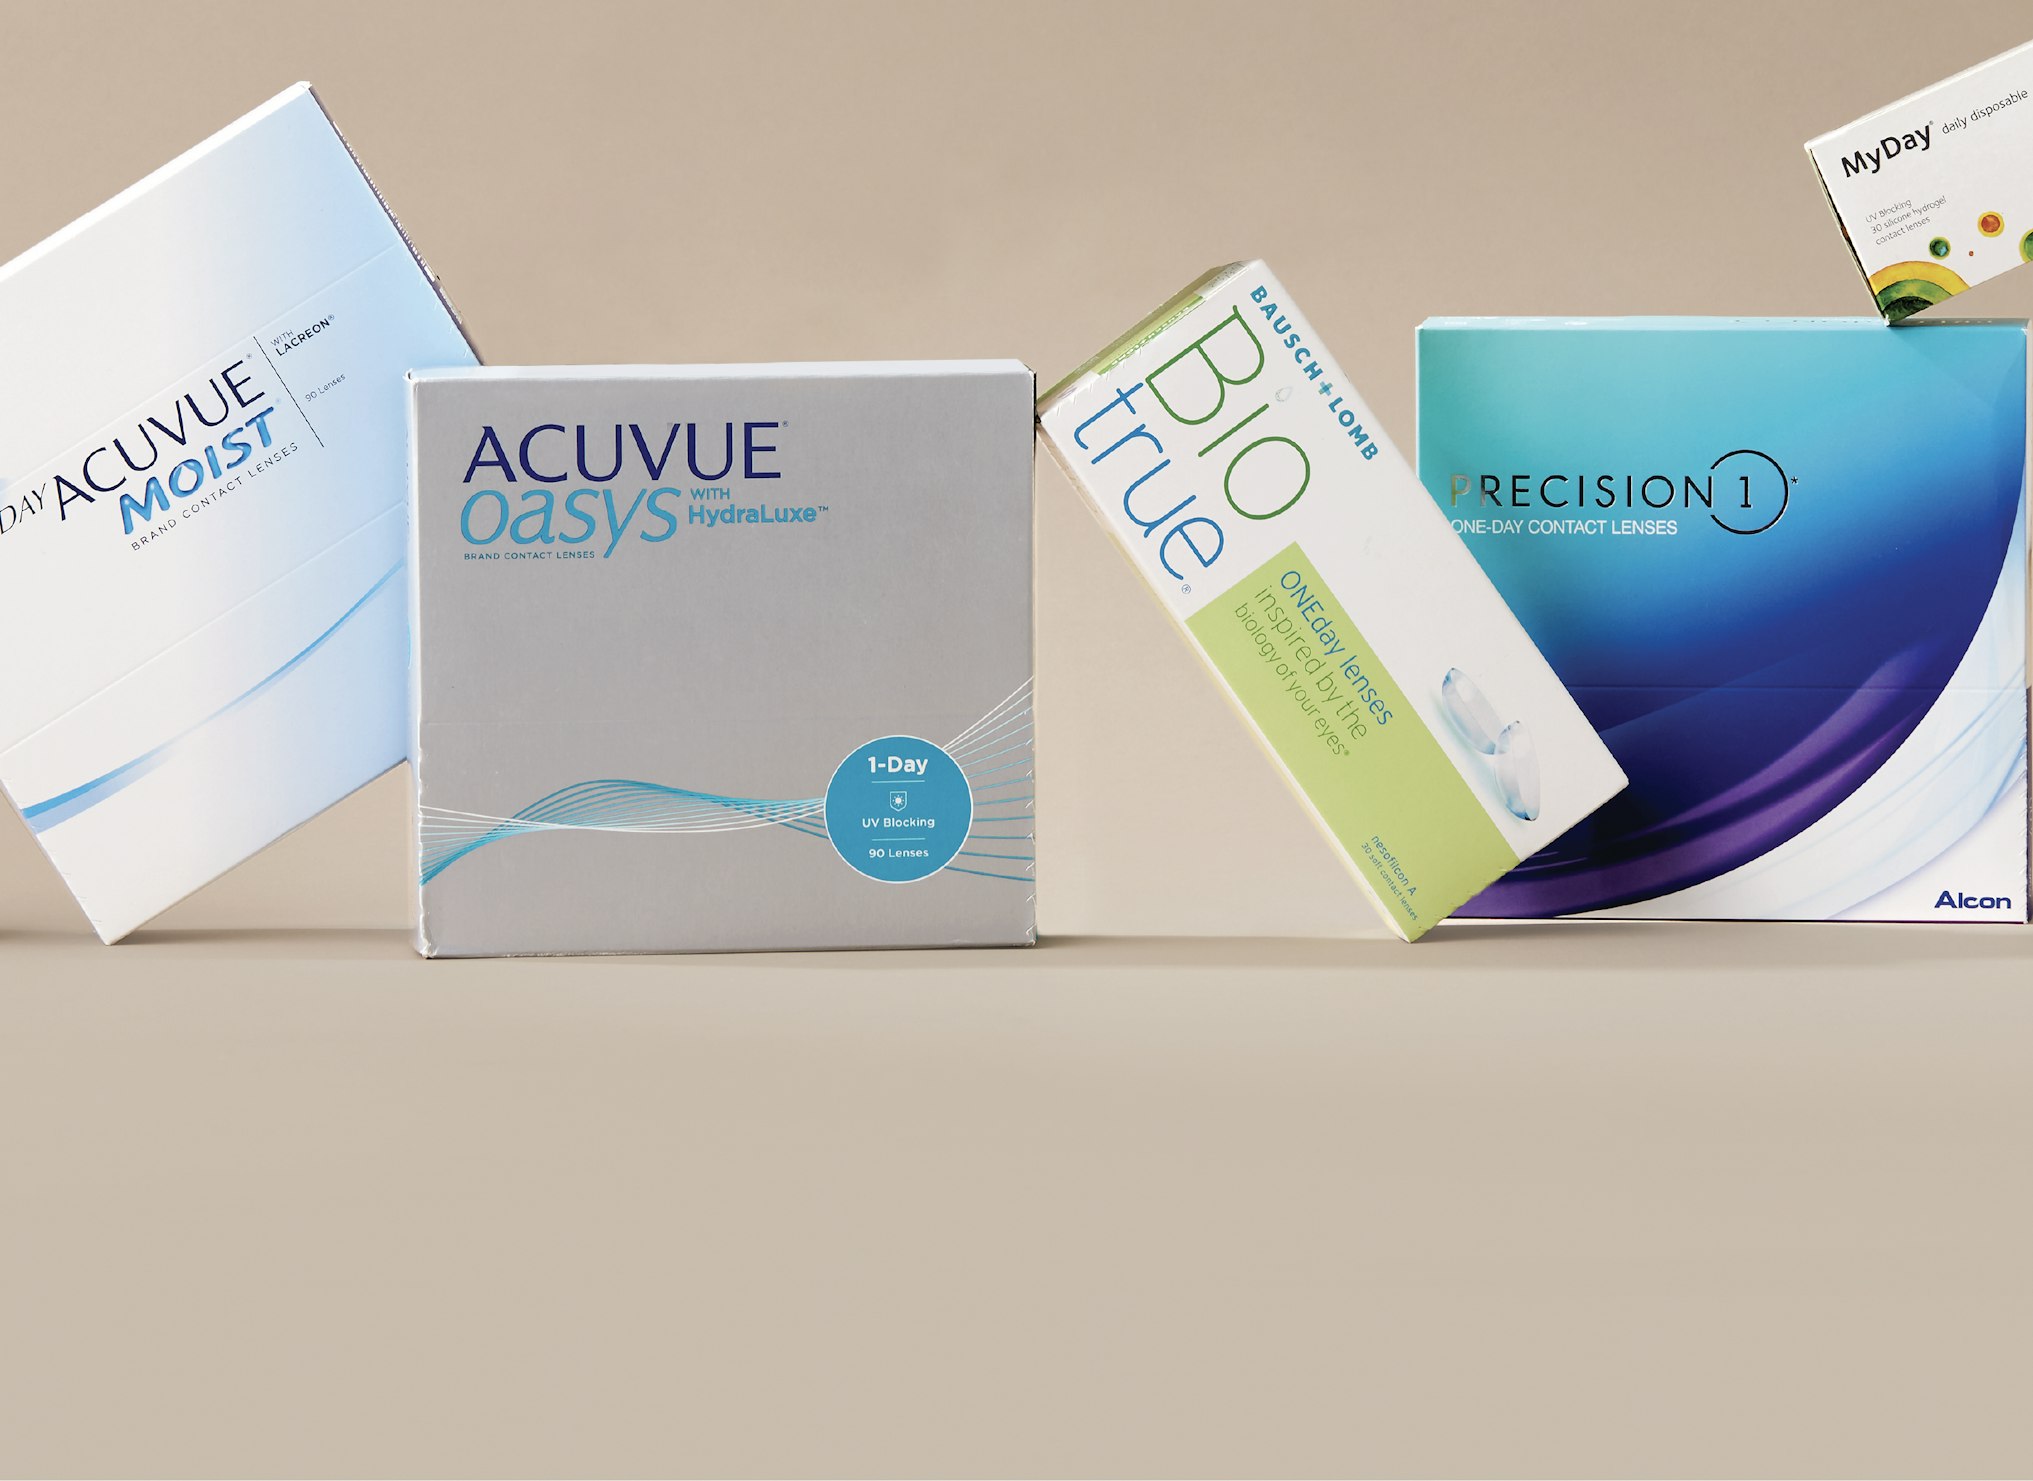 A contact lens boxes from Acuvue, Precision 1, MyDay and BioTrue.